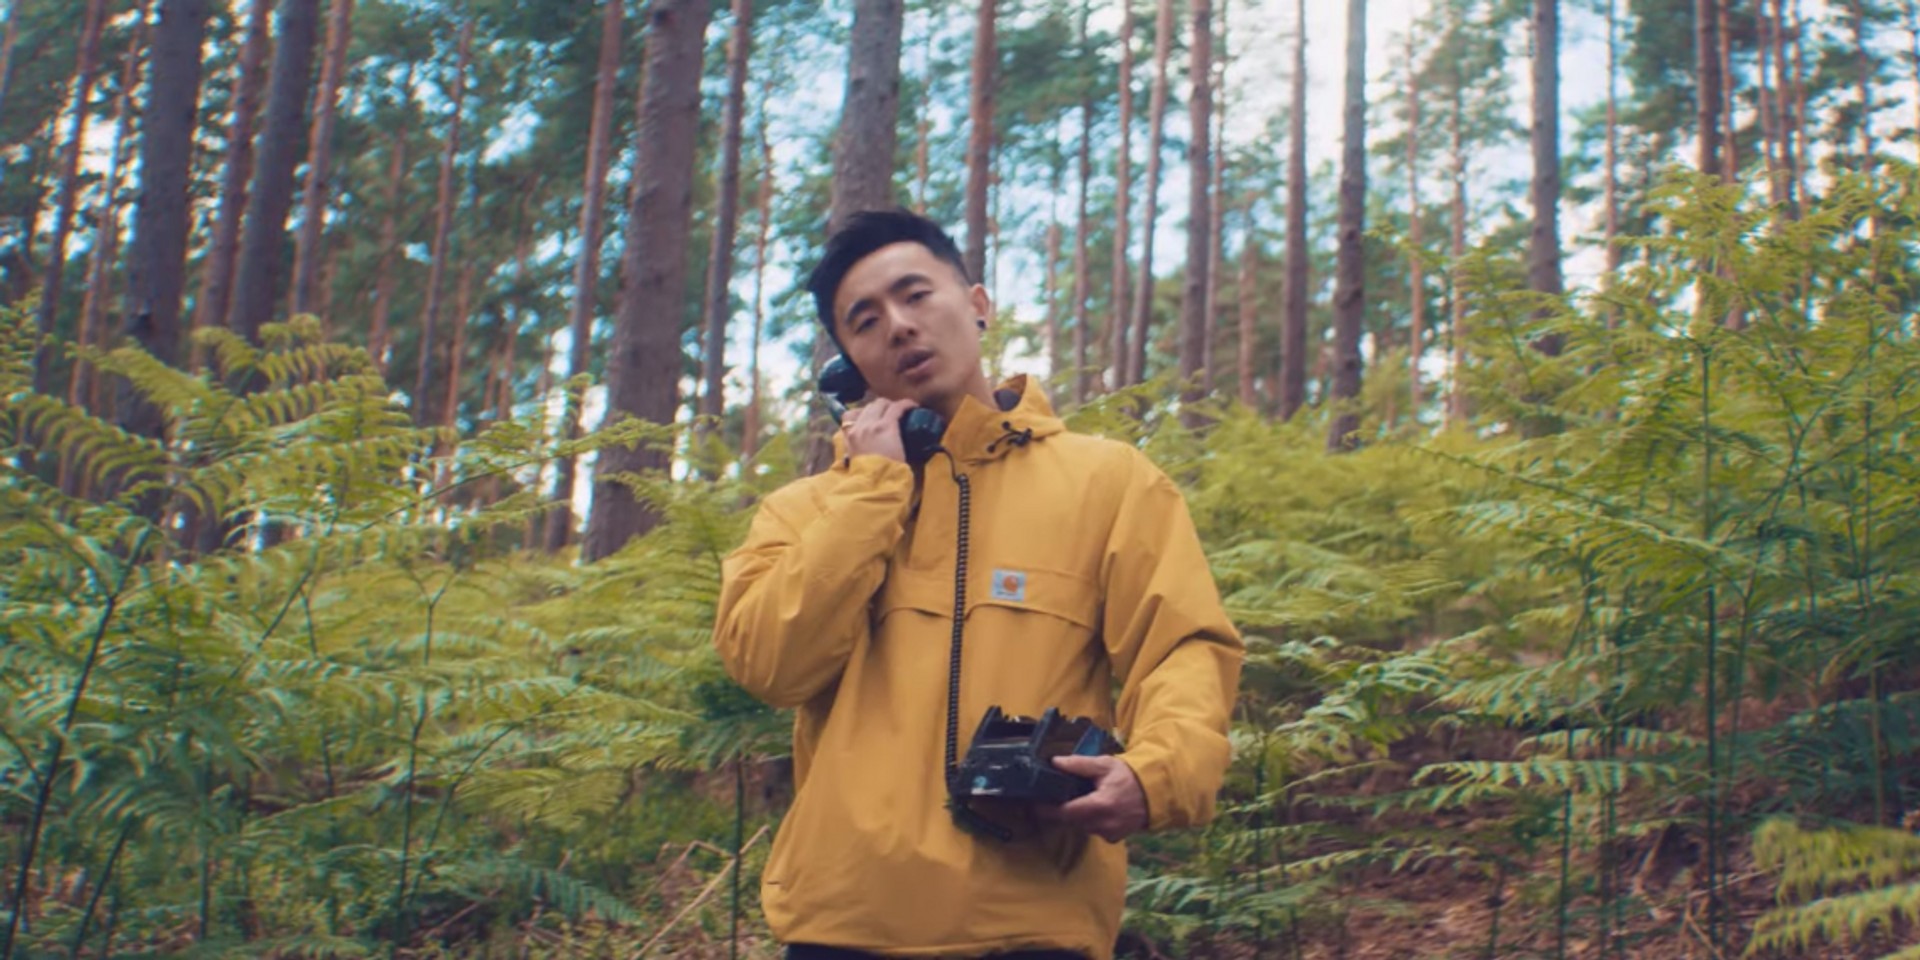 Lui Peng releases enchanting visuals for 'Just a Phone Call Away' – watch